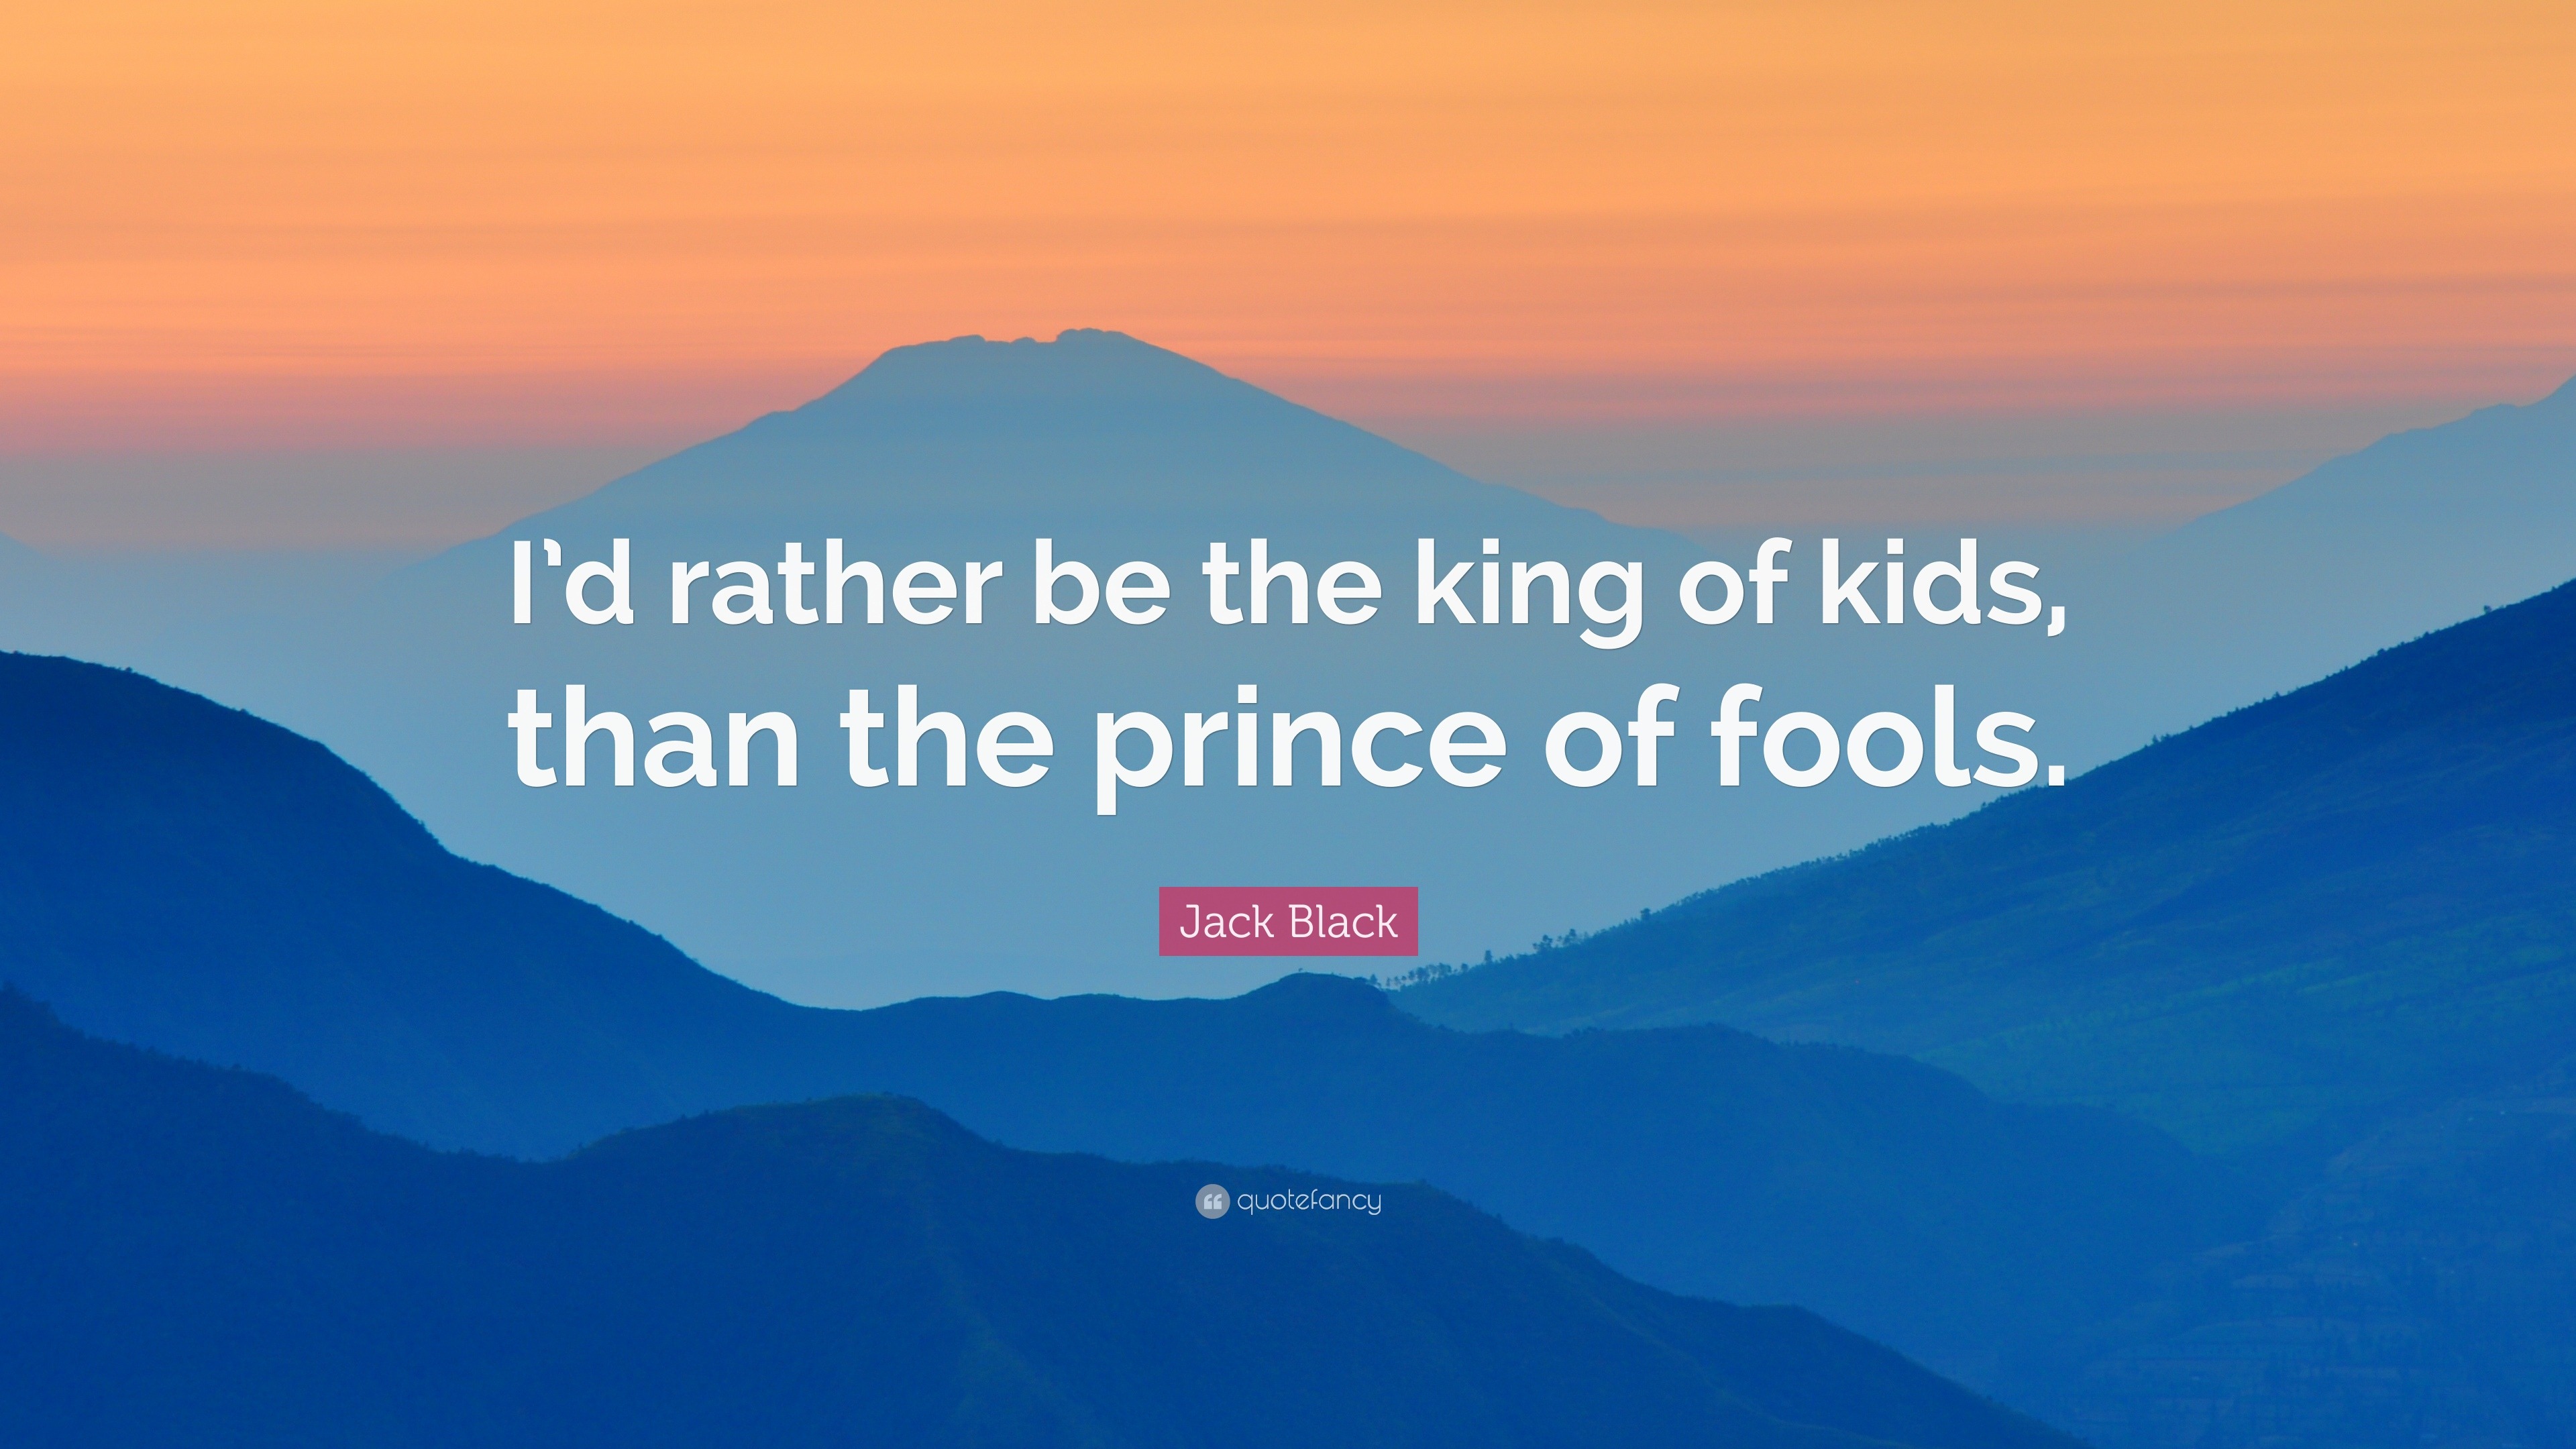 Jack Black Quote: "I'd rather be the king of kids, than the prince of fools." (12 wallpapers ...